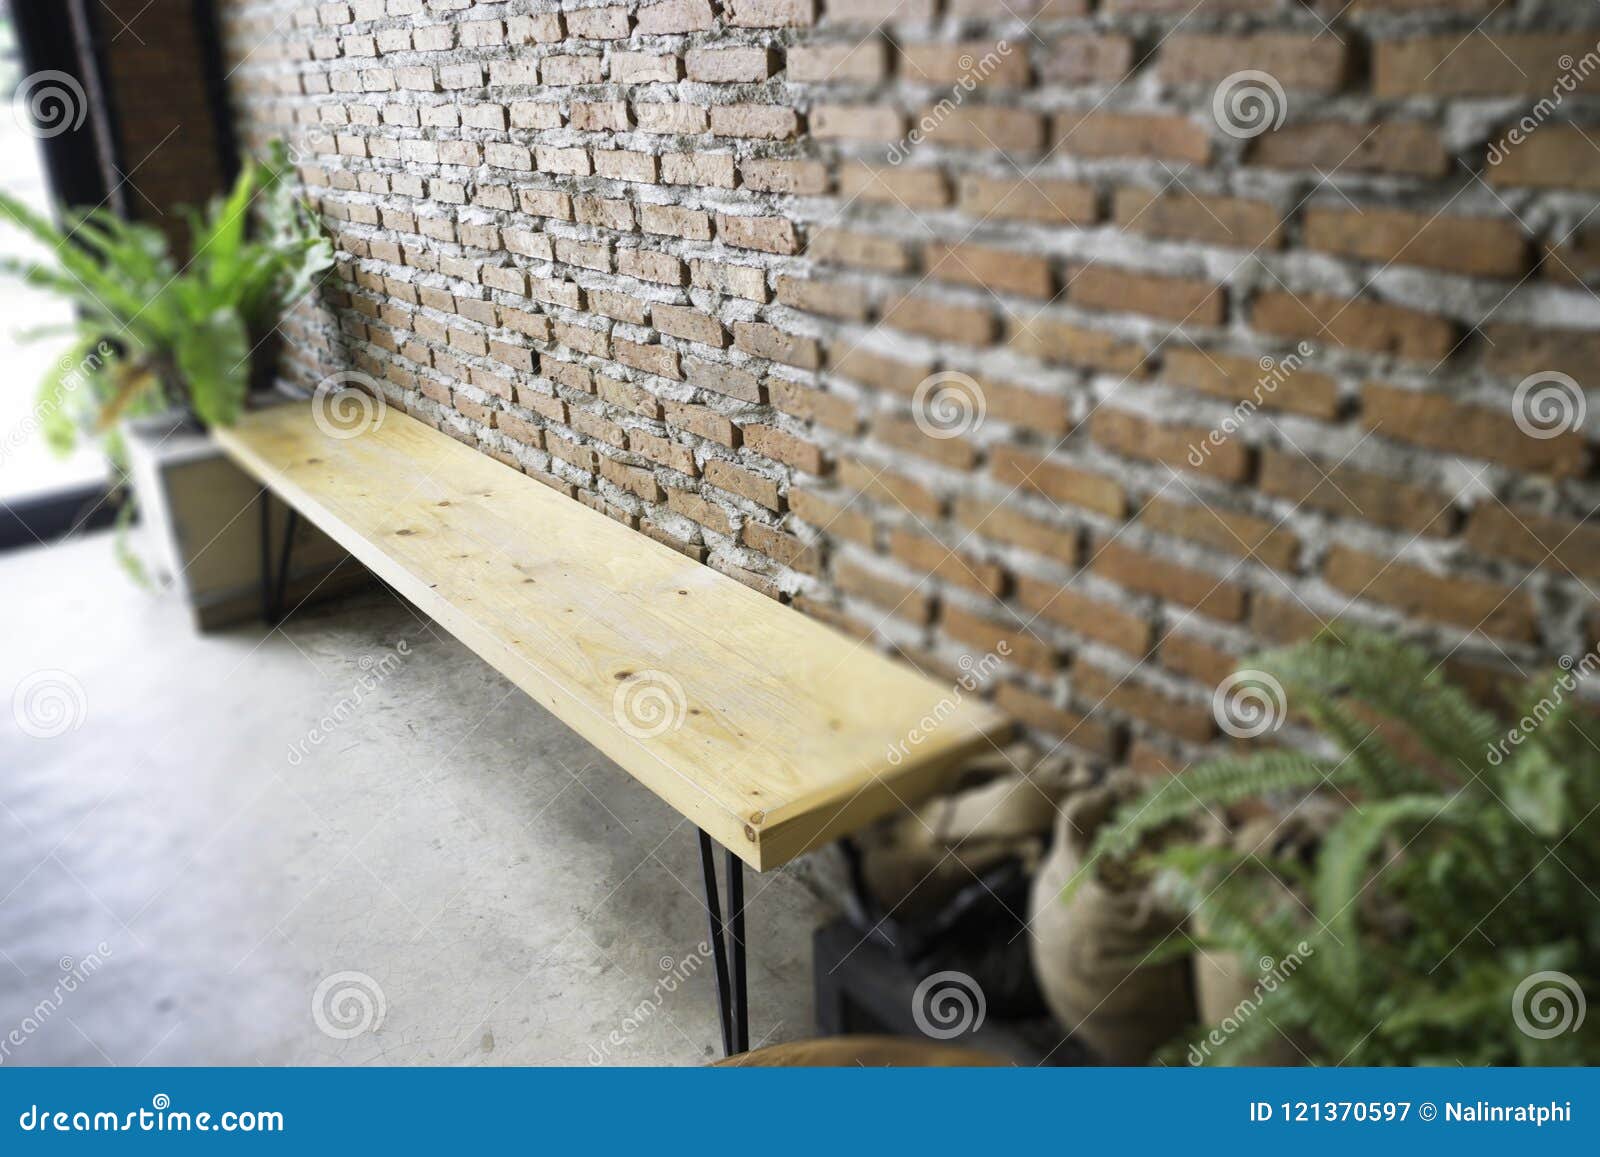 Wooden Bench For Waiting Area Stock Image Image Of Private